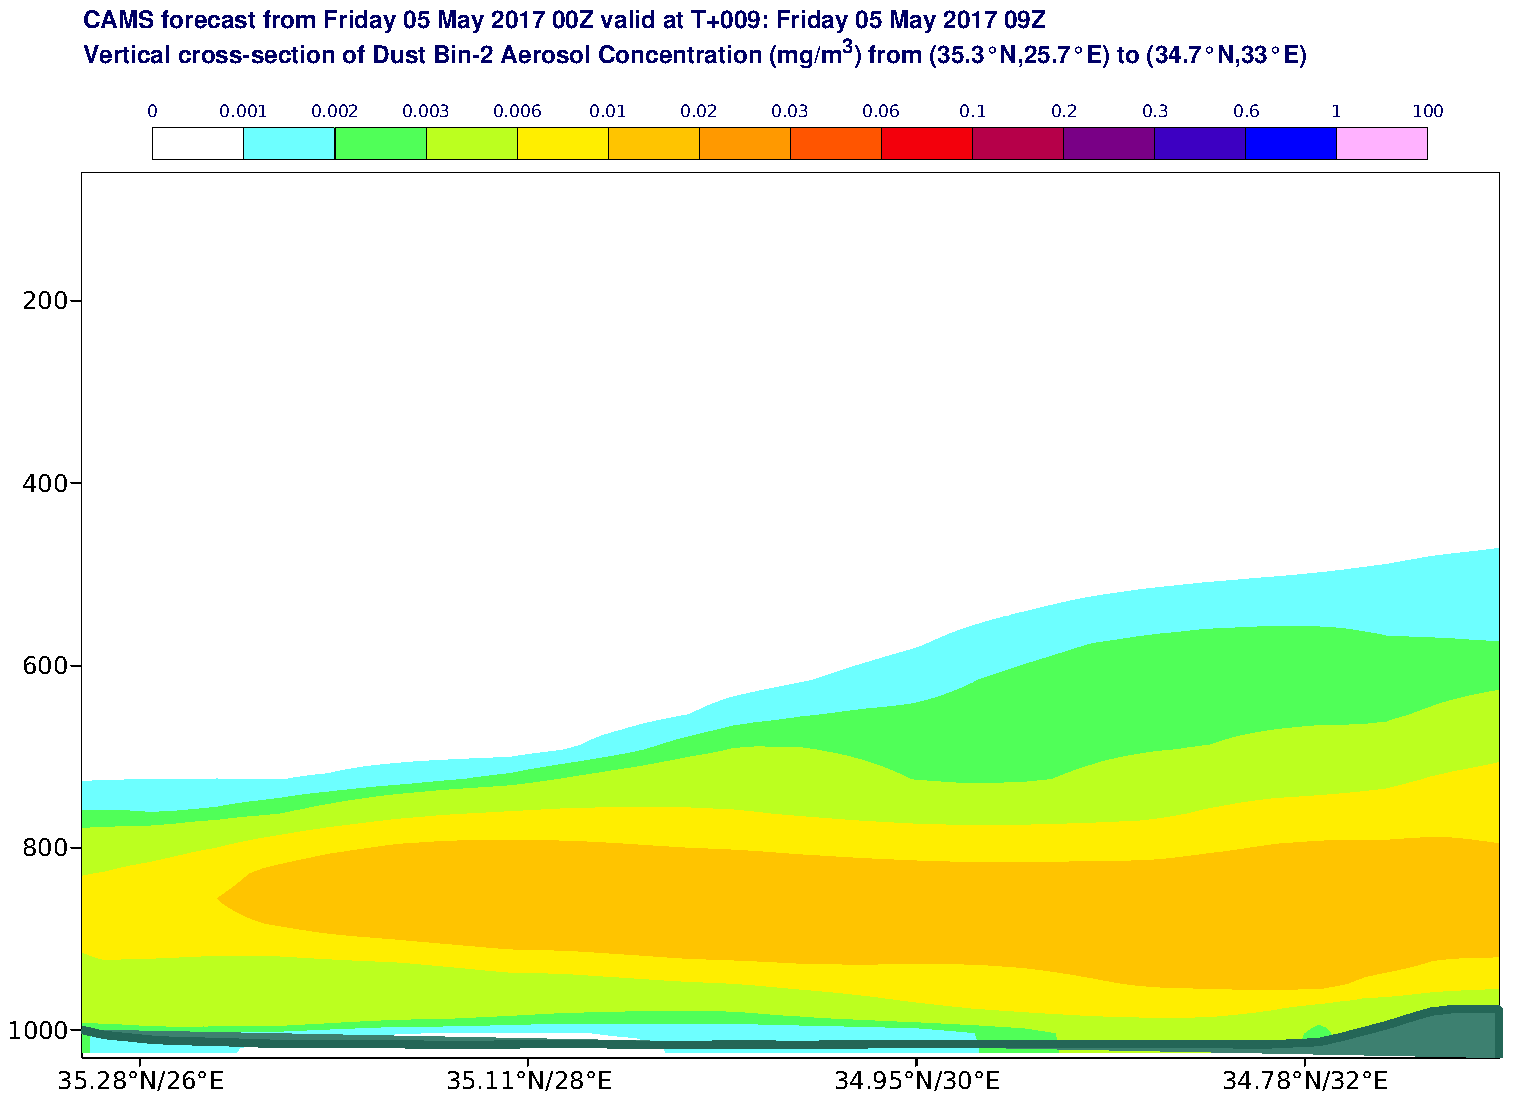 Vertical cross-section of Dust Bin-2 Aerosol Concentration (mg/m3) valid at T9 - 2017-05-05 09:00